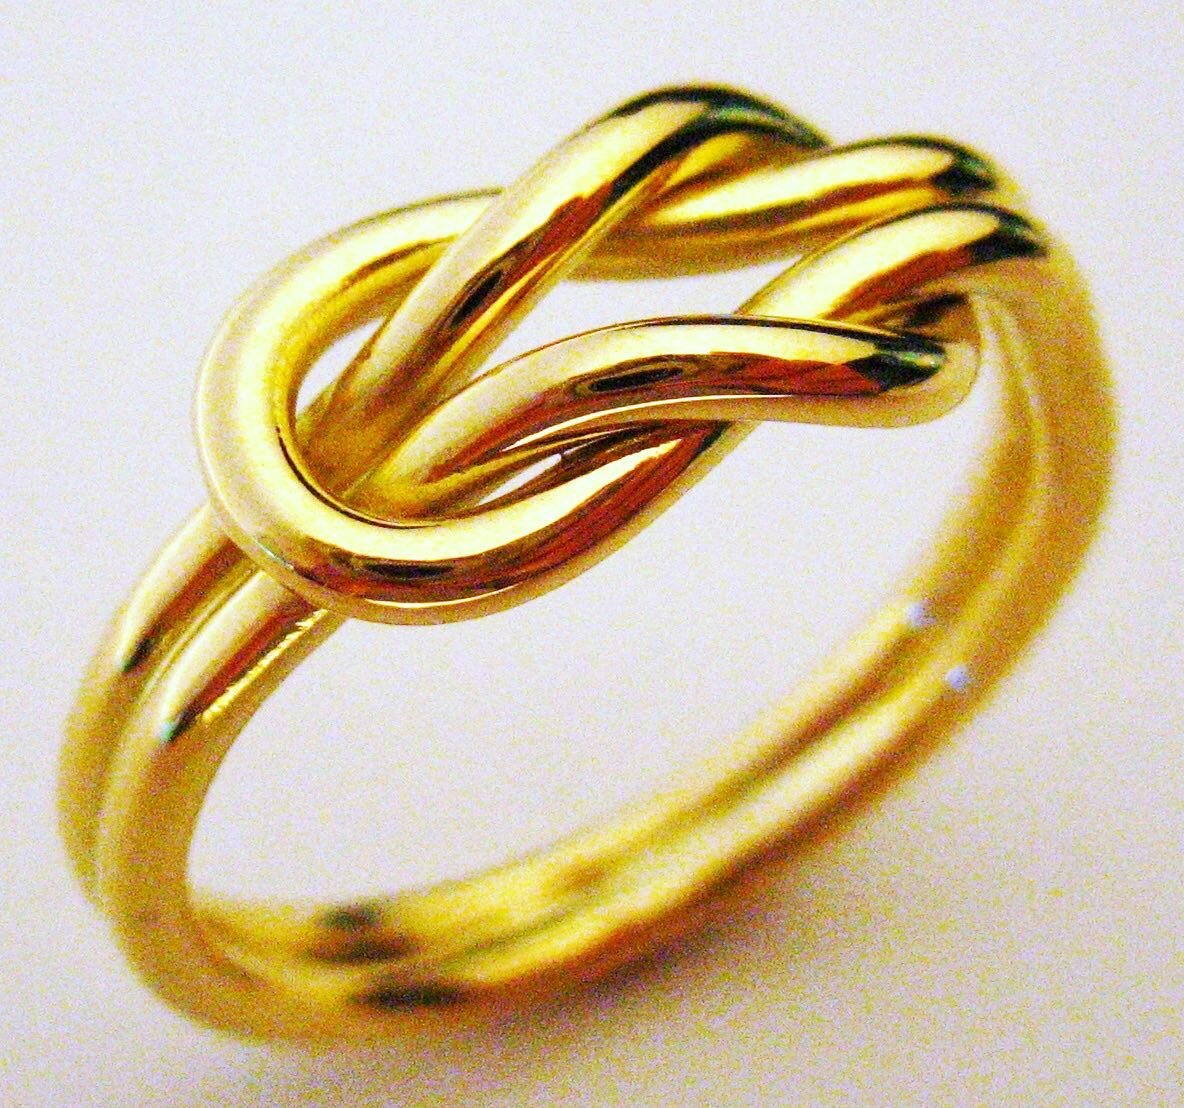 Knotted gold 🌟

Please get in touch if you would like to discuss a custom piece. 

#markscownjewellery #ring #ringsofinstagram #finejewellery #handmadejewellery #handmade #jewellerydesigner #gold #knot #celticknots #eternity #custommadejewellery #by